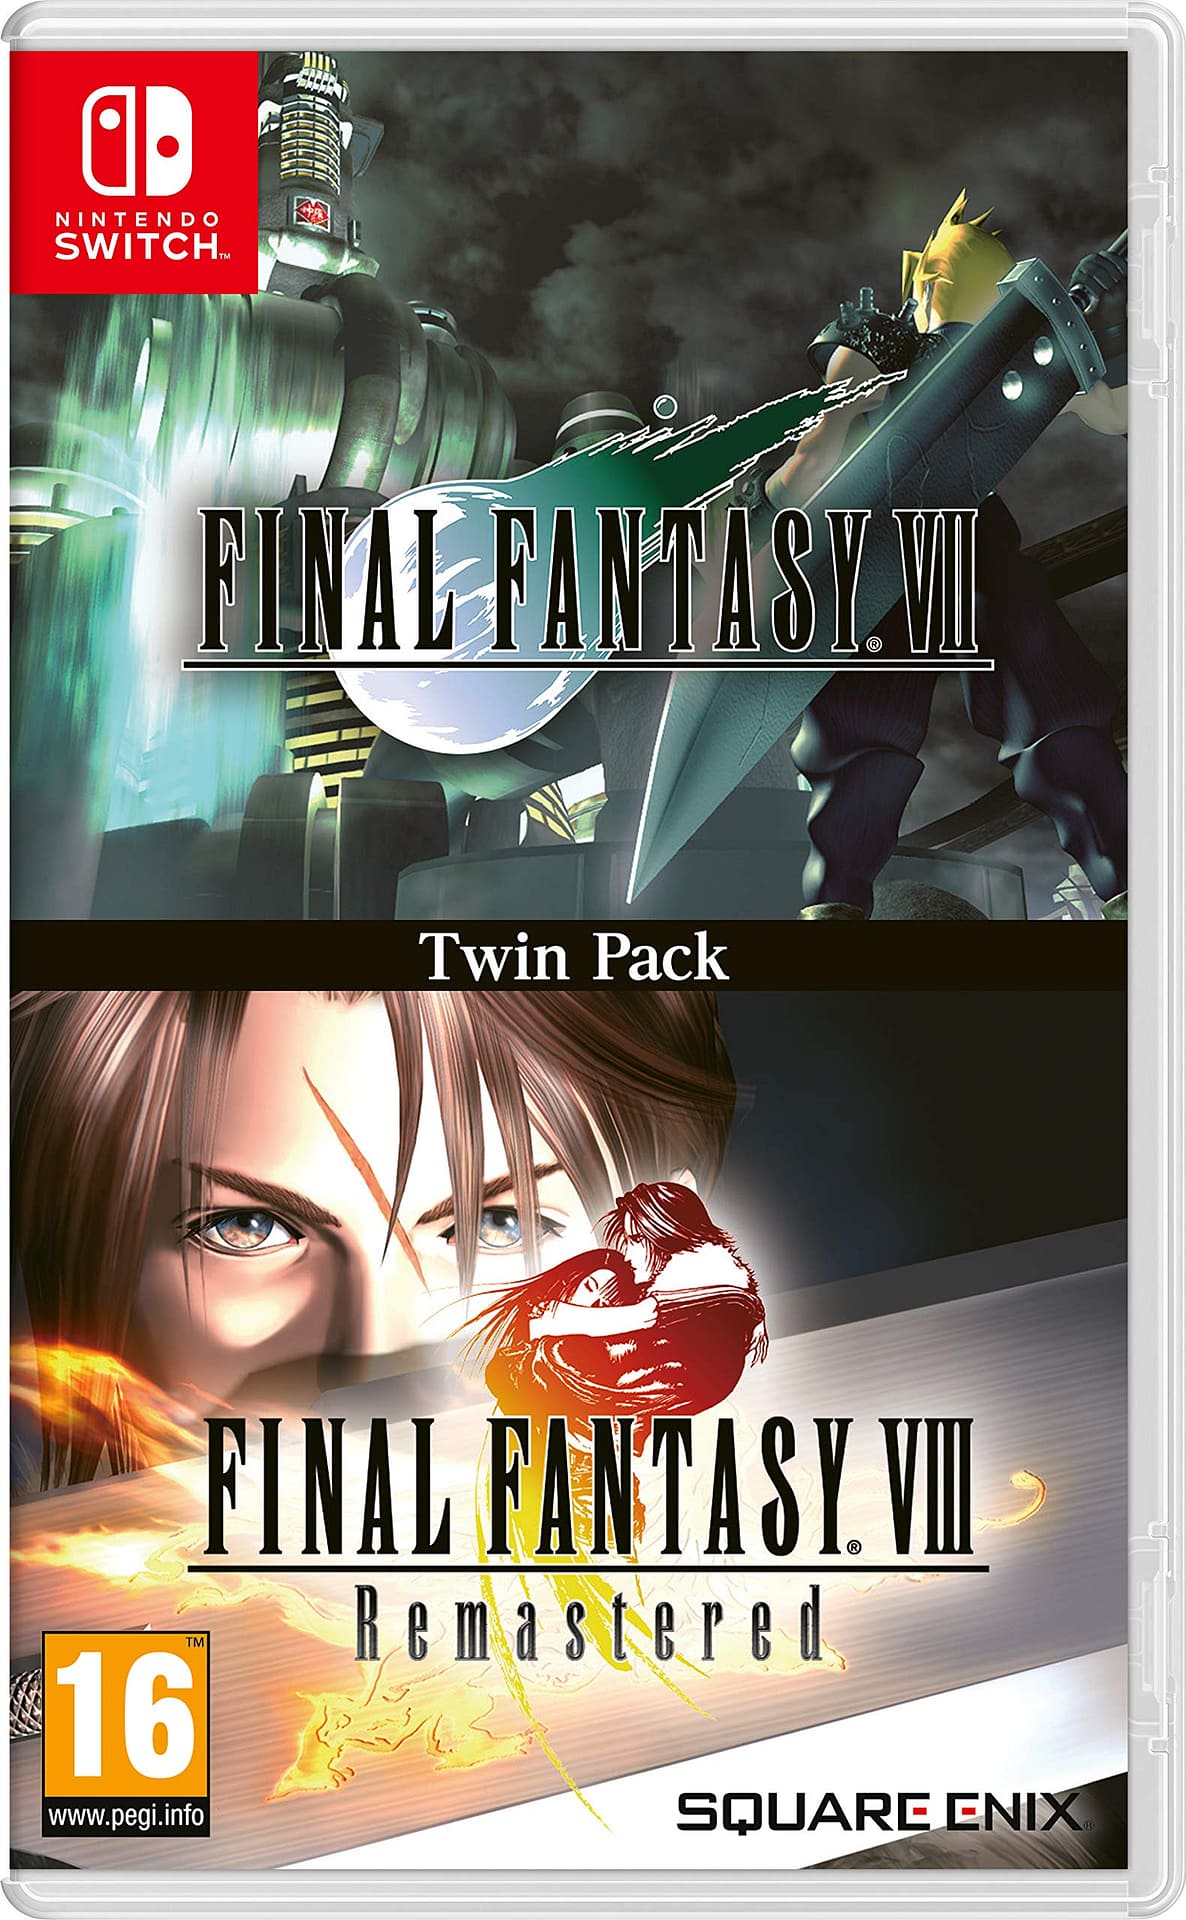 Final Fantasy VII and Final Fantasy VIII Remastered - Twin Pack